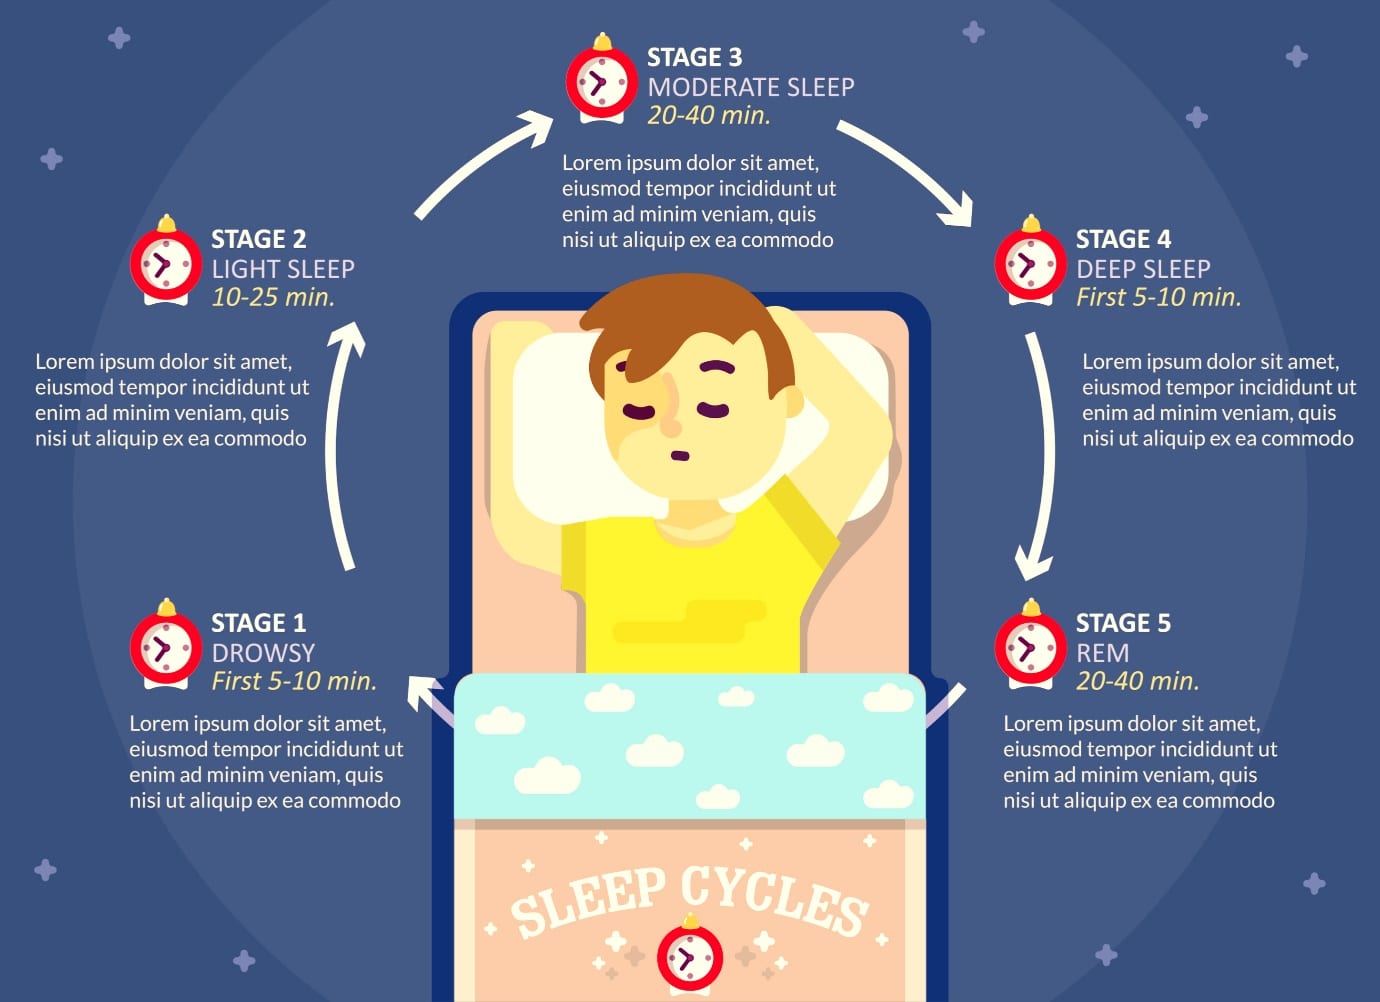 WHAT ARE THE STAGES OF THE SLEEP CYCLE? - NiTe 1G